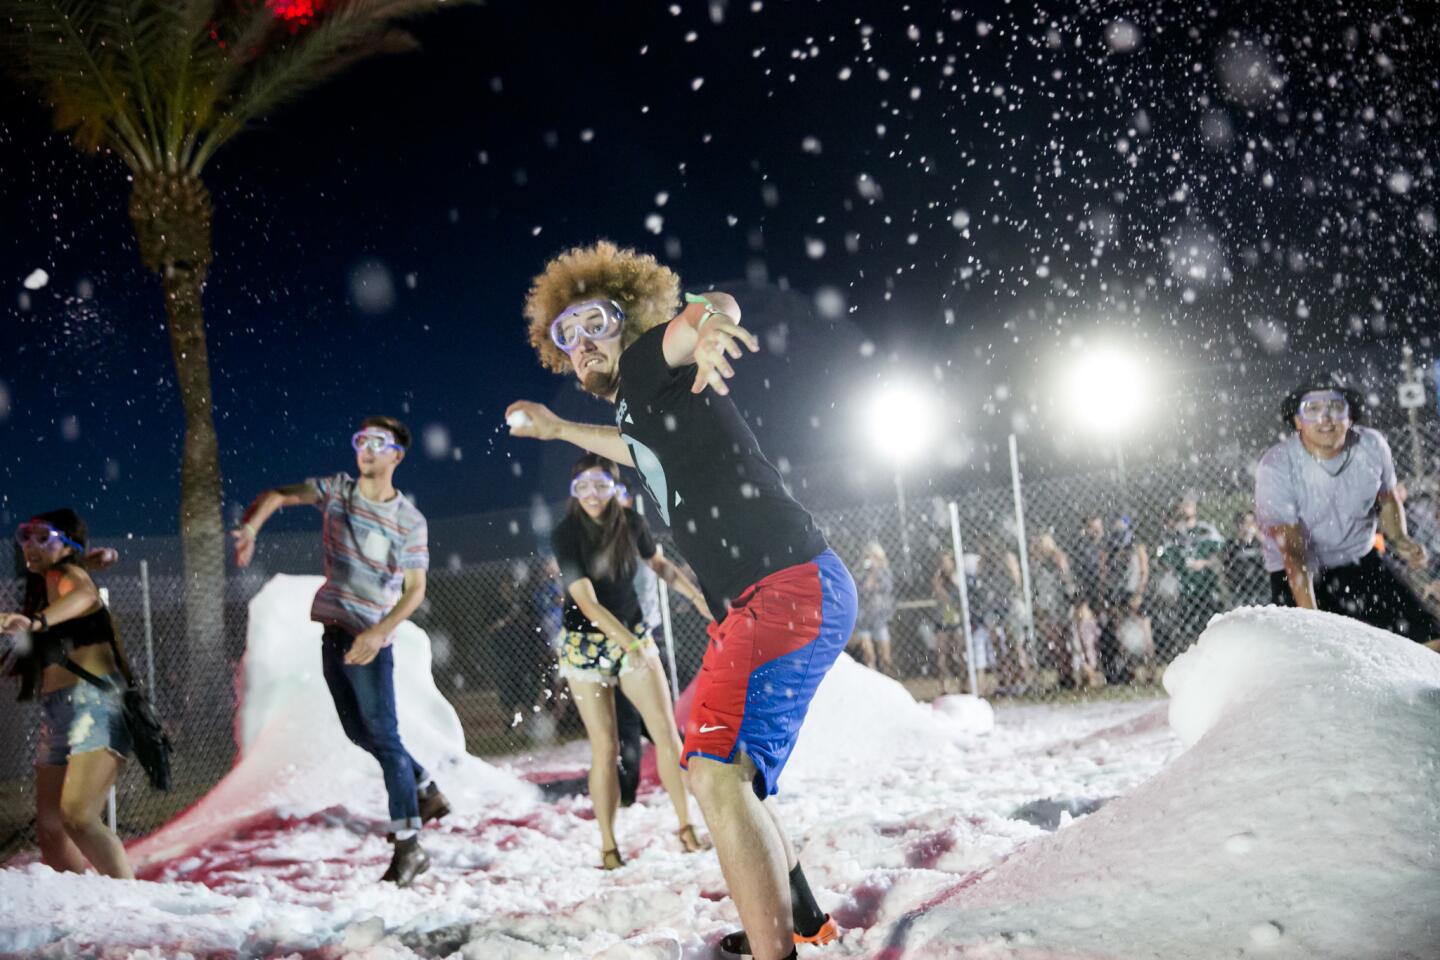 Jimmy Arwood, center and other Coachella festival goers participate in a snowball fight, one of the many activities on the camp site during Week 2 of the Coachella Valley Music and Arts Festival, 2015.